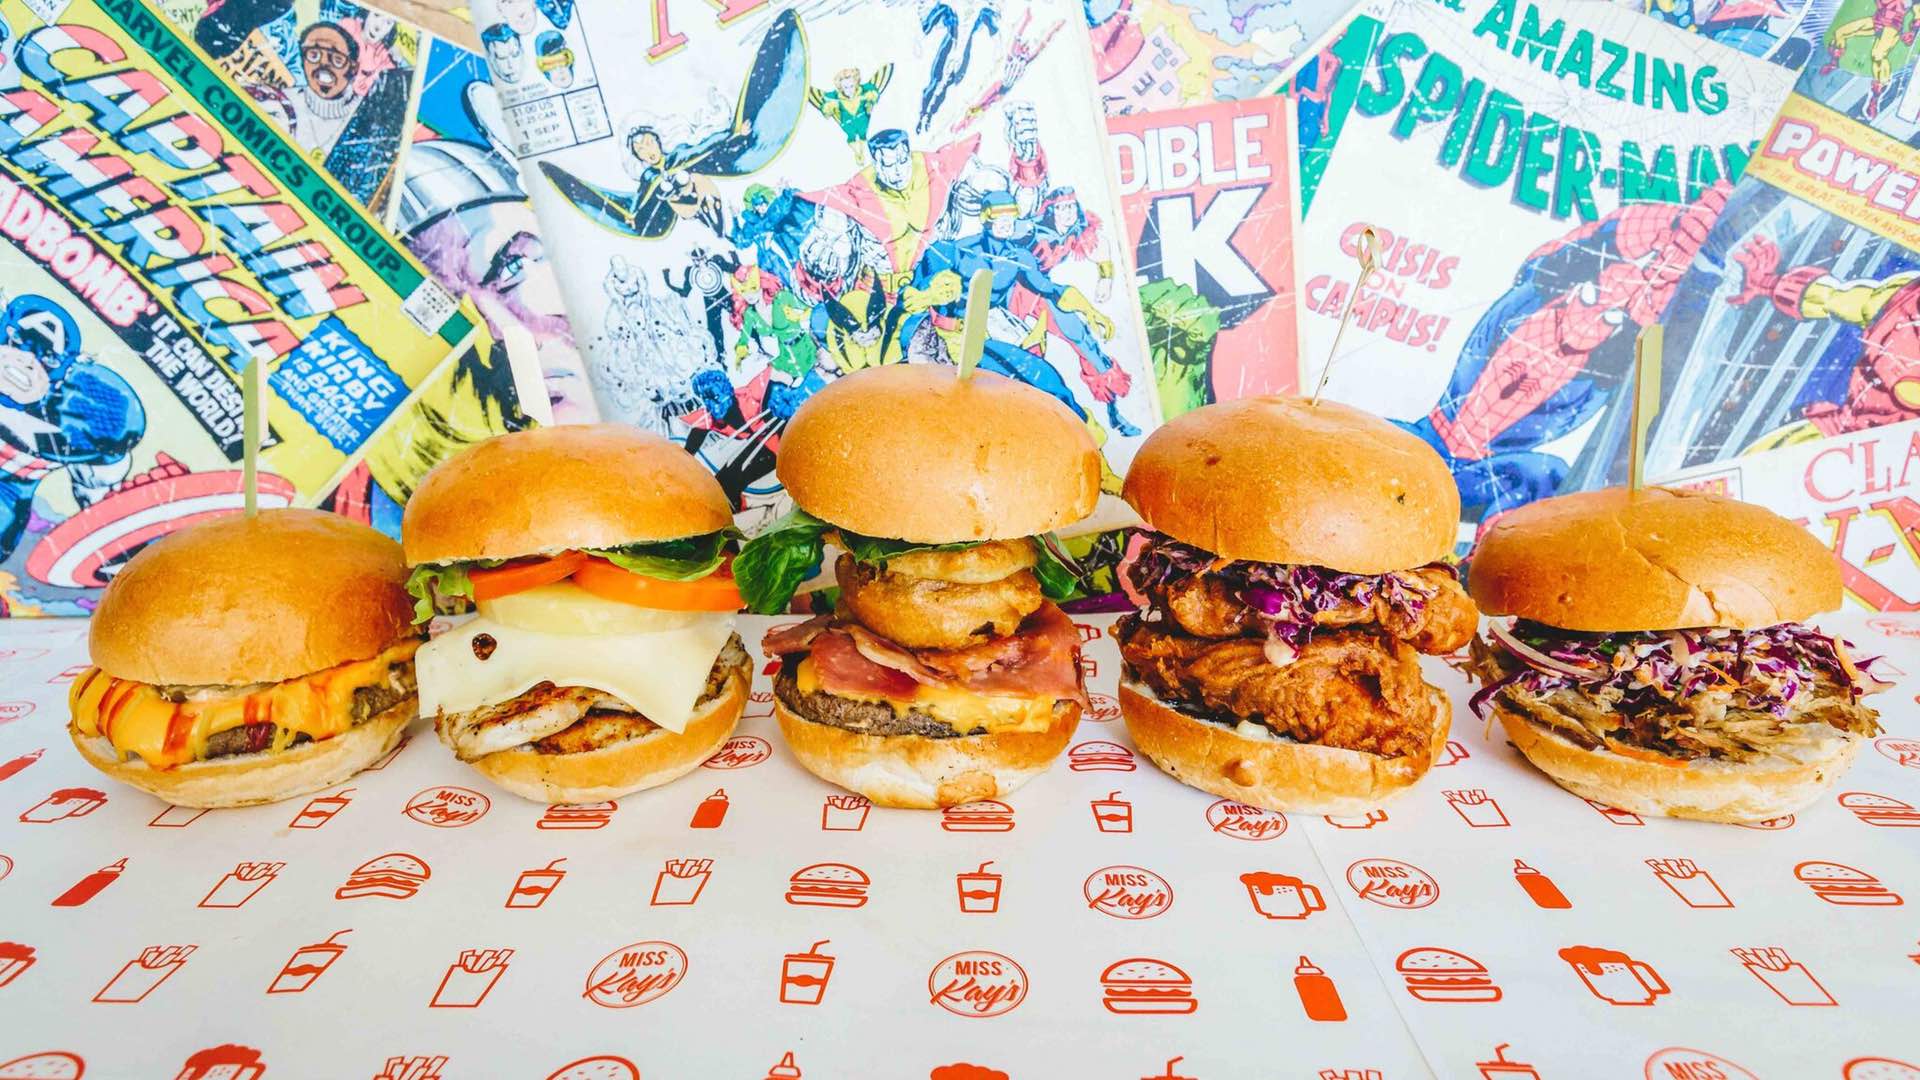 Miss Kay's Is Opening a Takeaway and Delivery-Only Joint in Woolloongabba